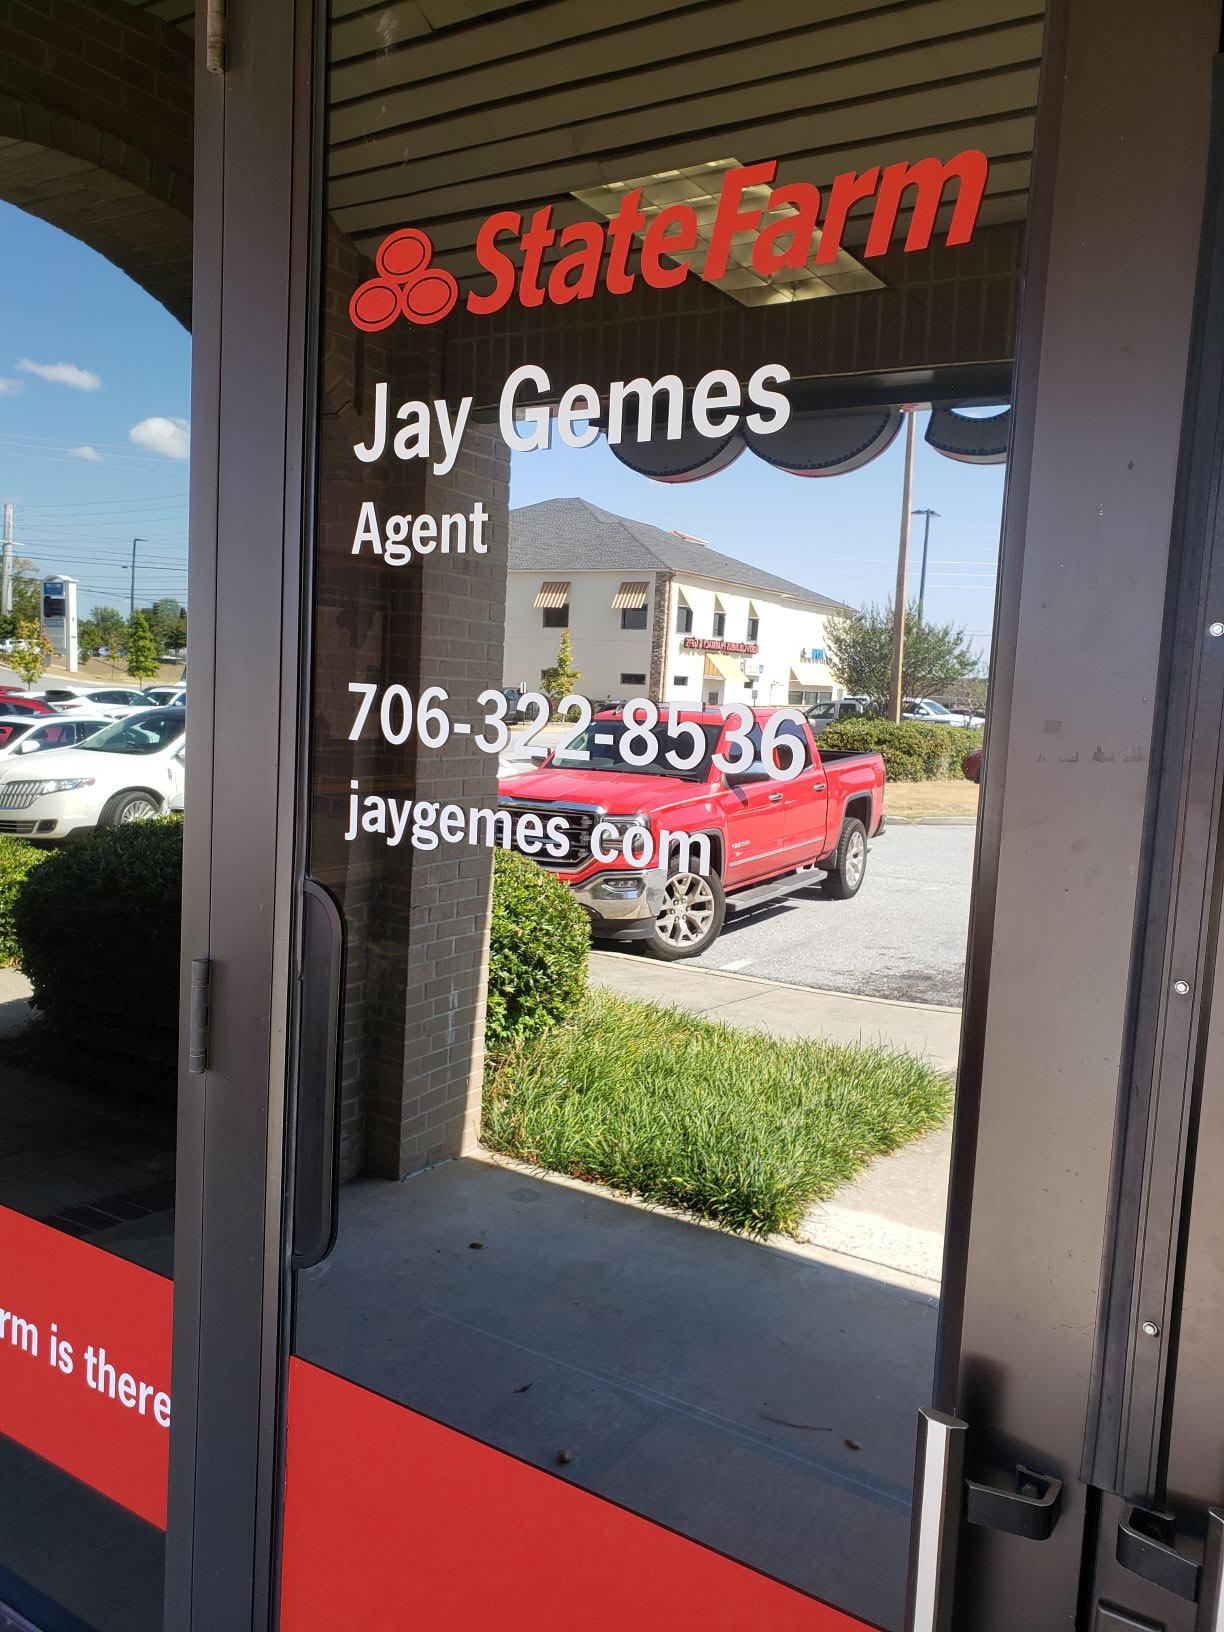 Jay Gemes - State Farm Insurance Agent Photo